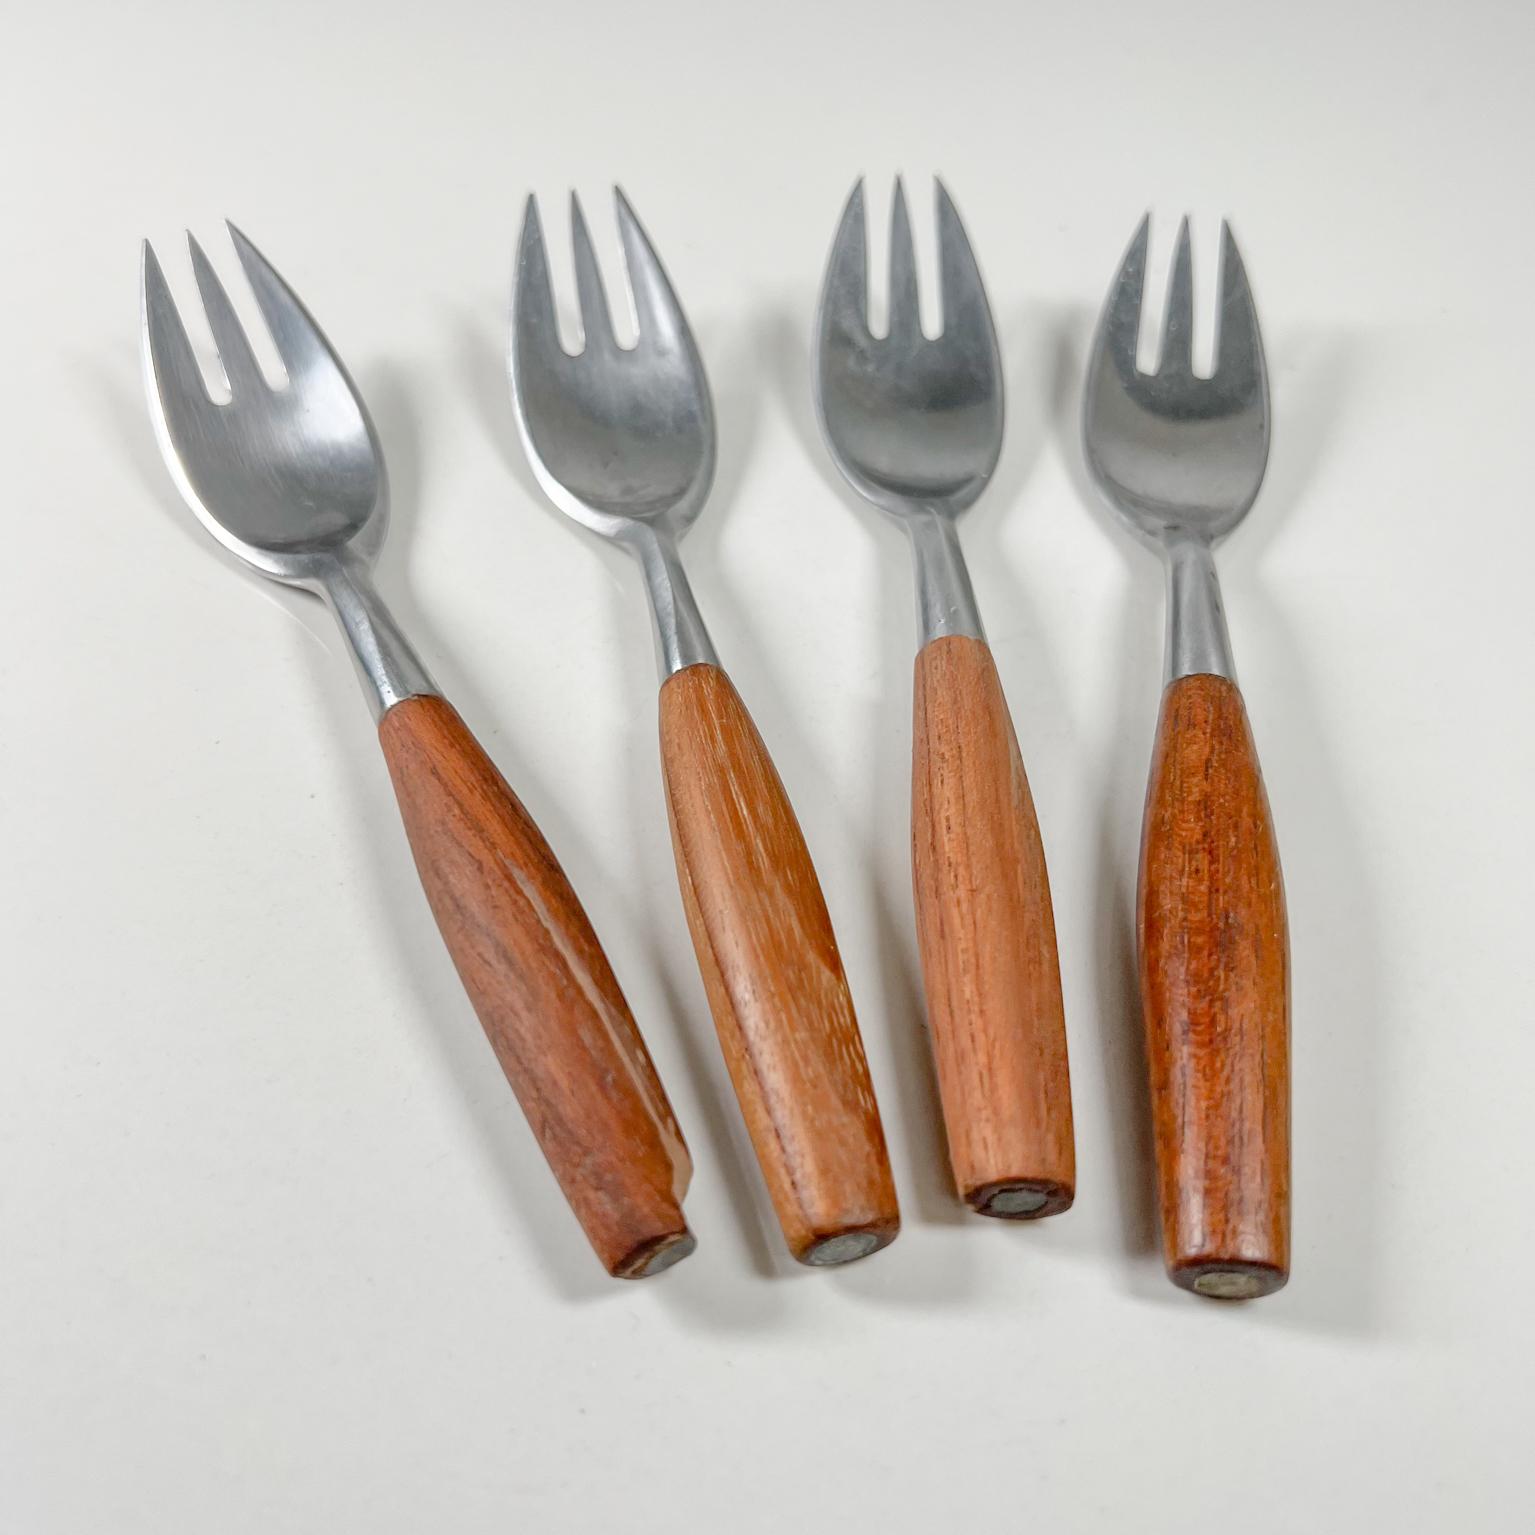 Dansk made in Germany Cutlery
Dansk IHQ Germany set of 4 salad forks teak & stainless Fjord Flatware 1954
Made in Teak Wood and Stainless Steel Designed by Jens Quistgaard
Nicks on wood, scuffs on metal. Not new.
Unrestored preowned original